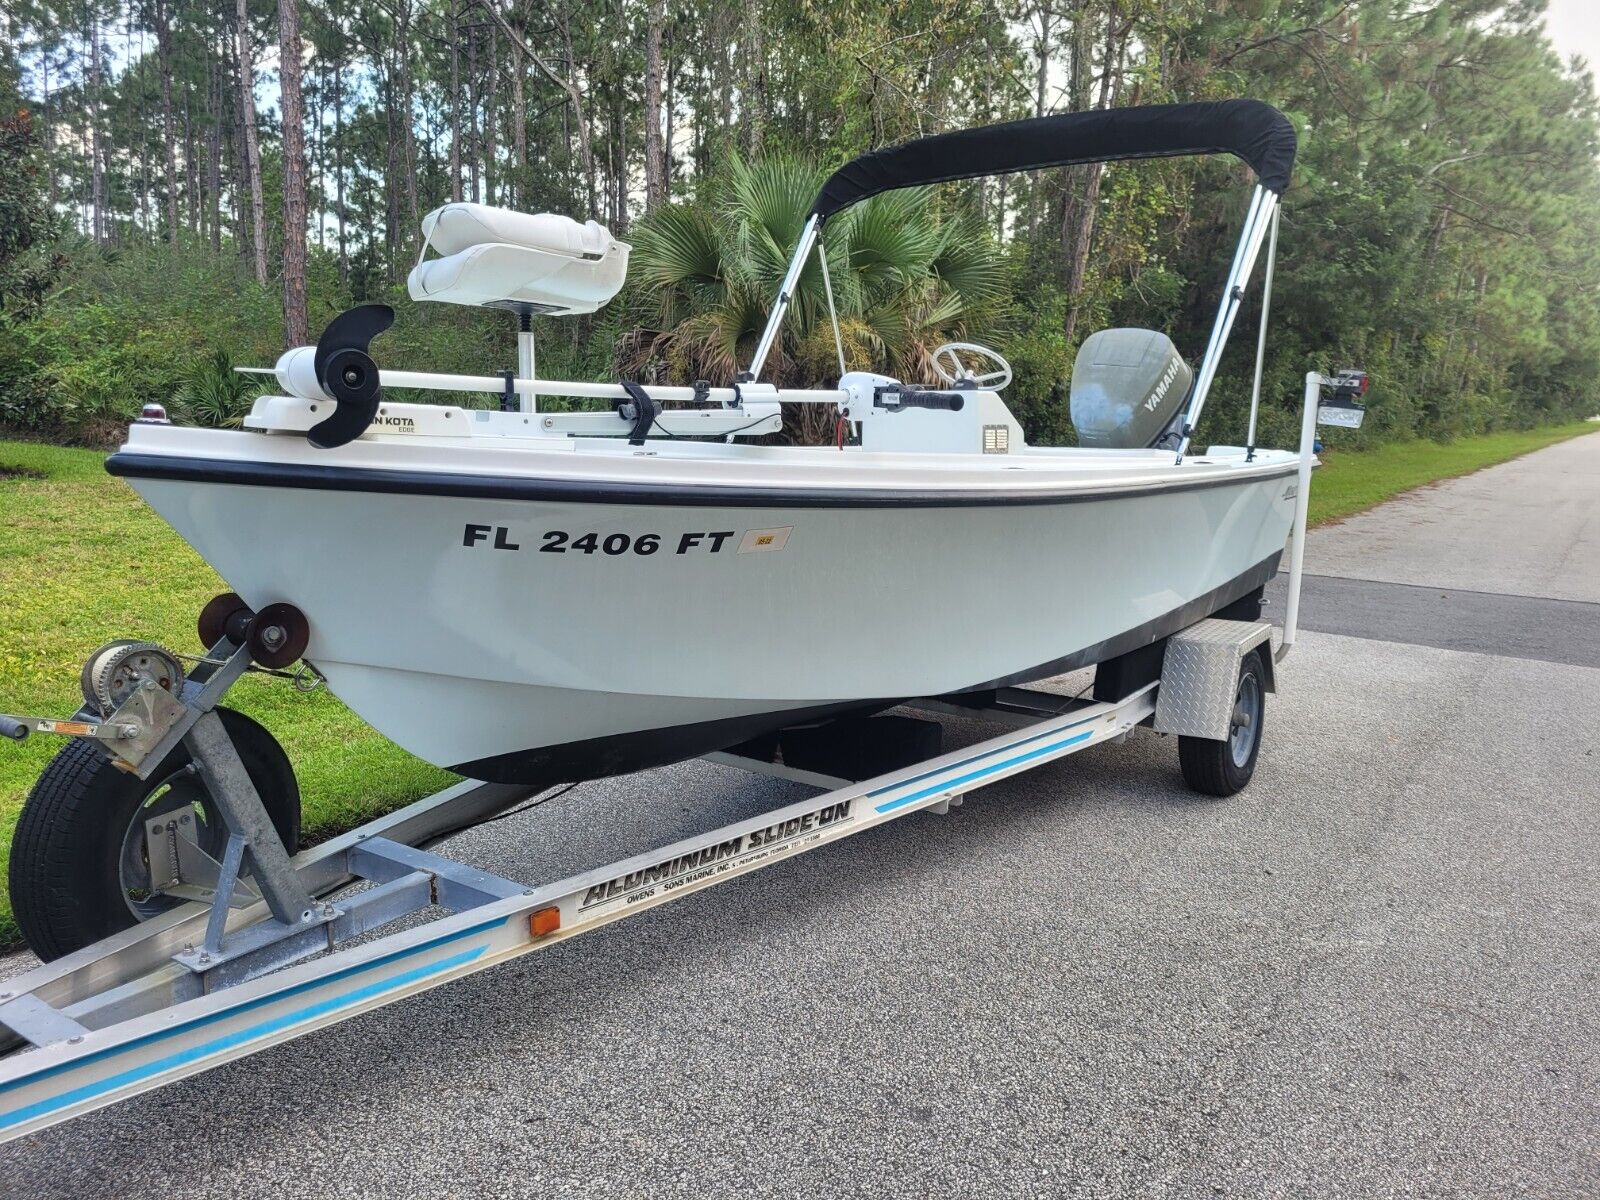 Used Small Fishing Boats For Sale 1989 for sale for $7,000 - Boats